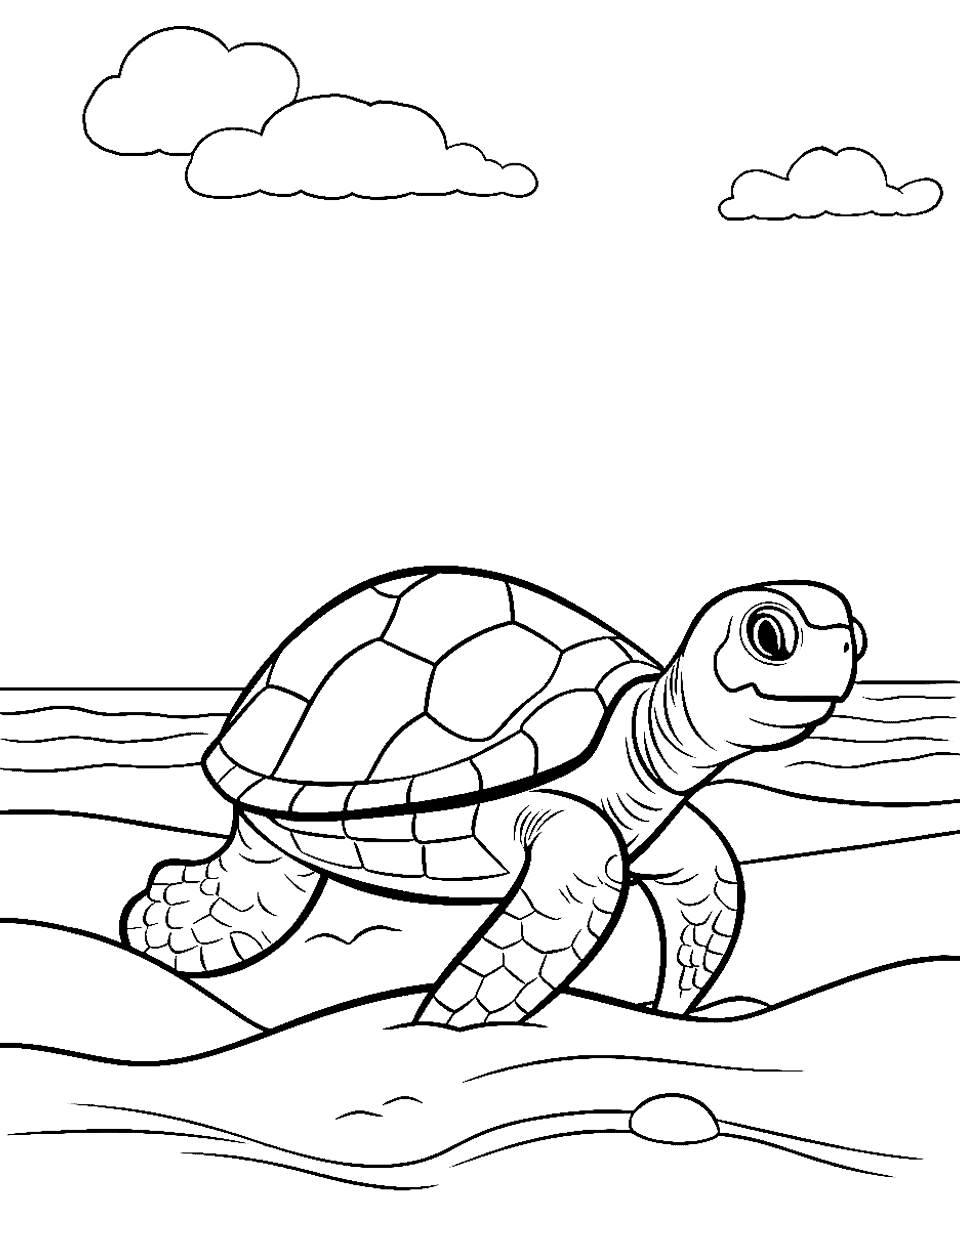 Turtle's First Step Turtle Coloring Page - A small turtle taking its first step on the sand.